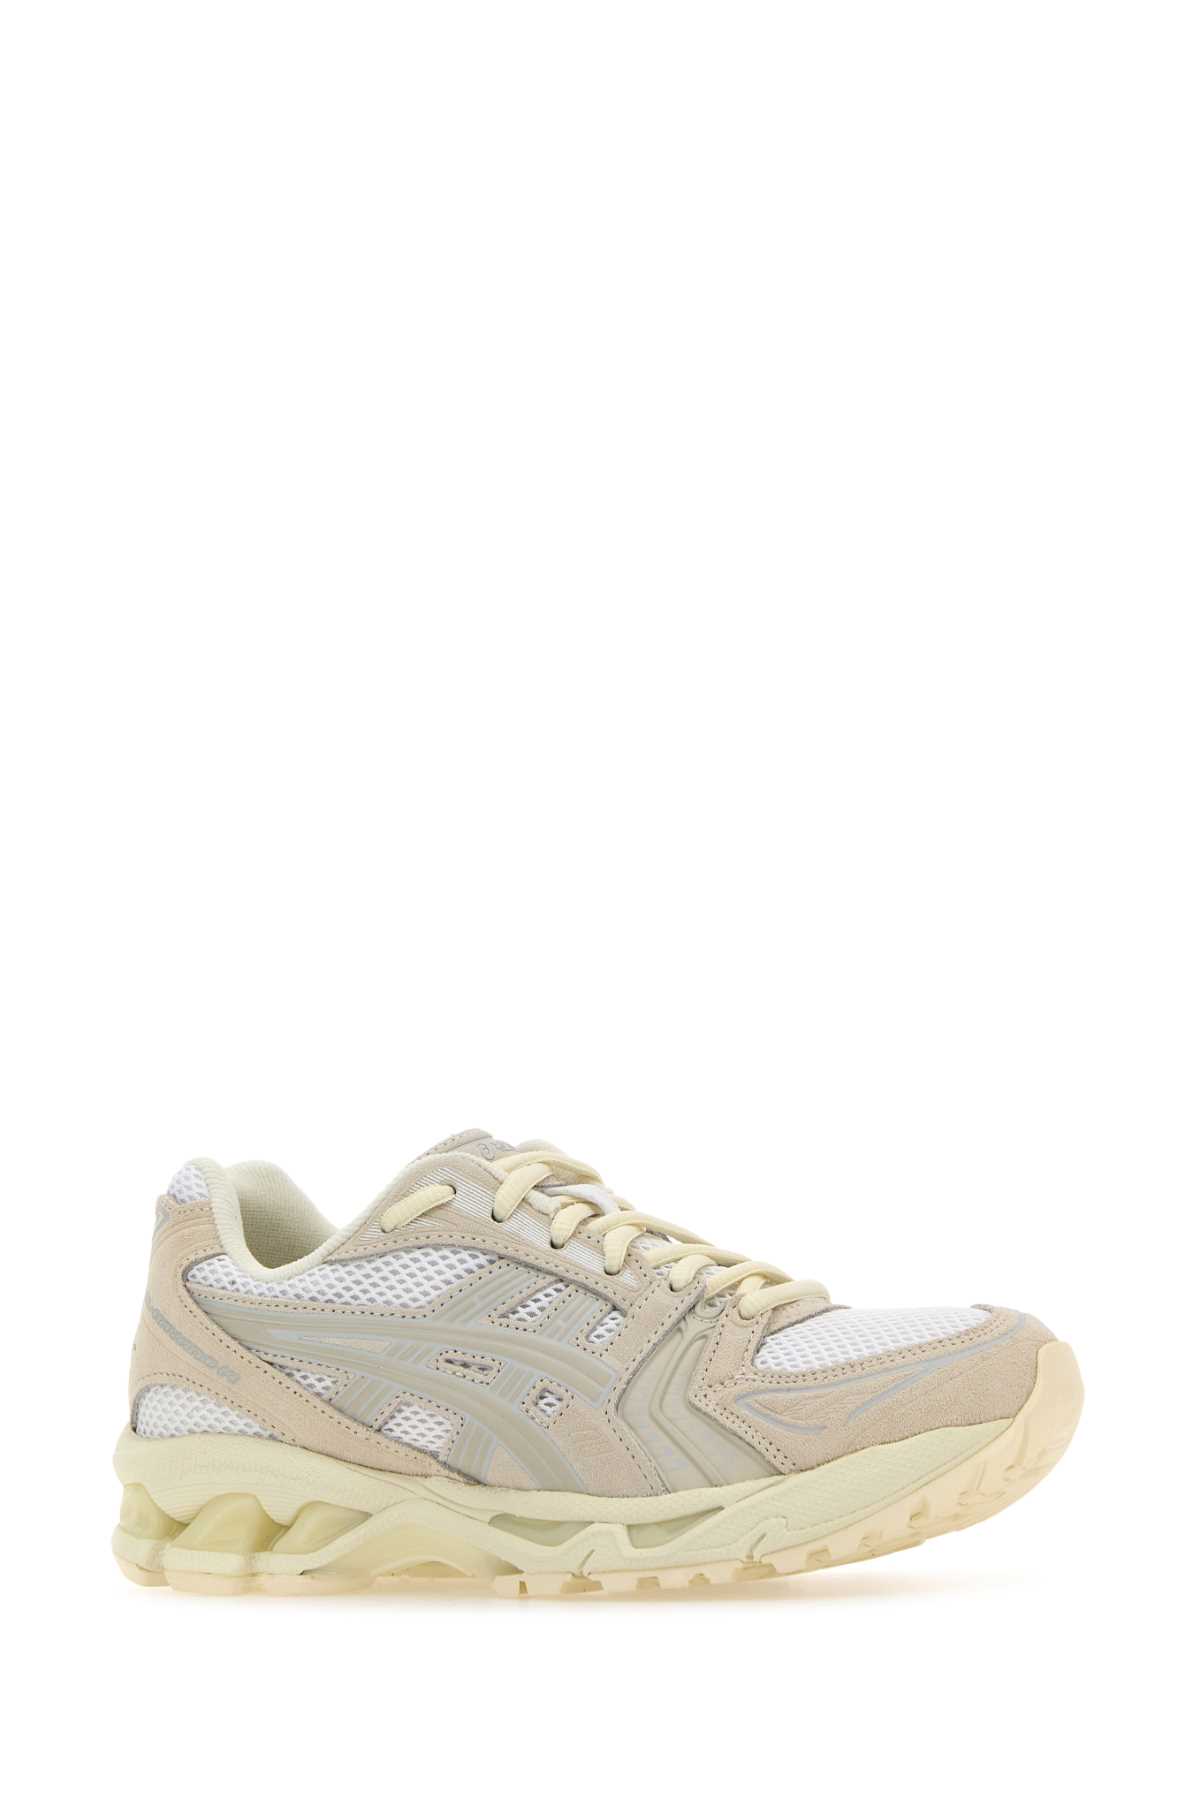 ASICS TWO-TONE MESH AND SUEDE GEL-KAYANO 14 SNEAKERS